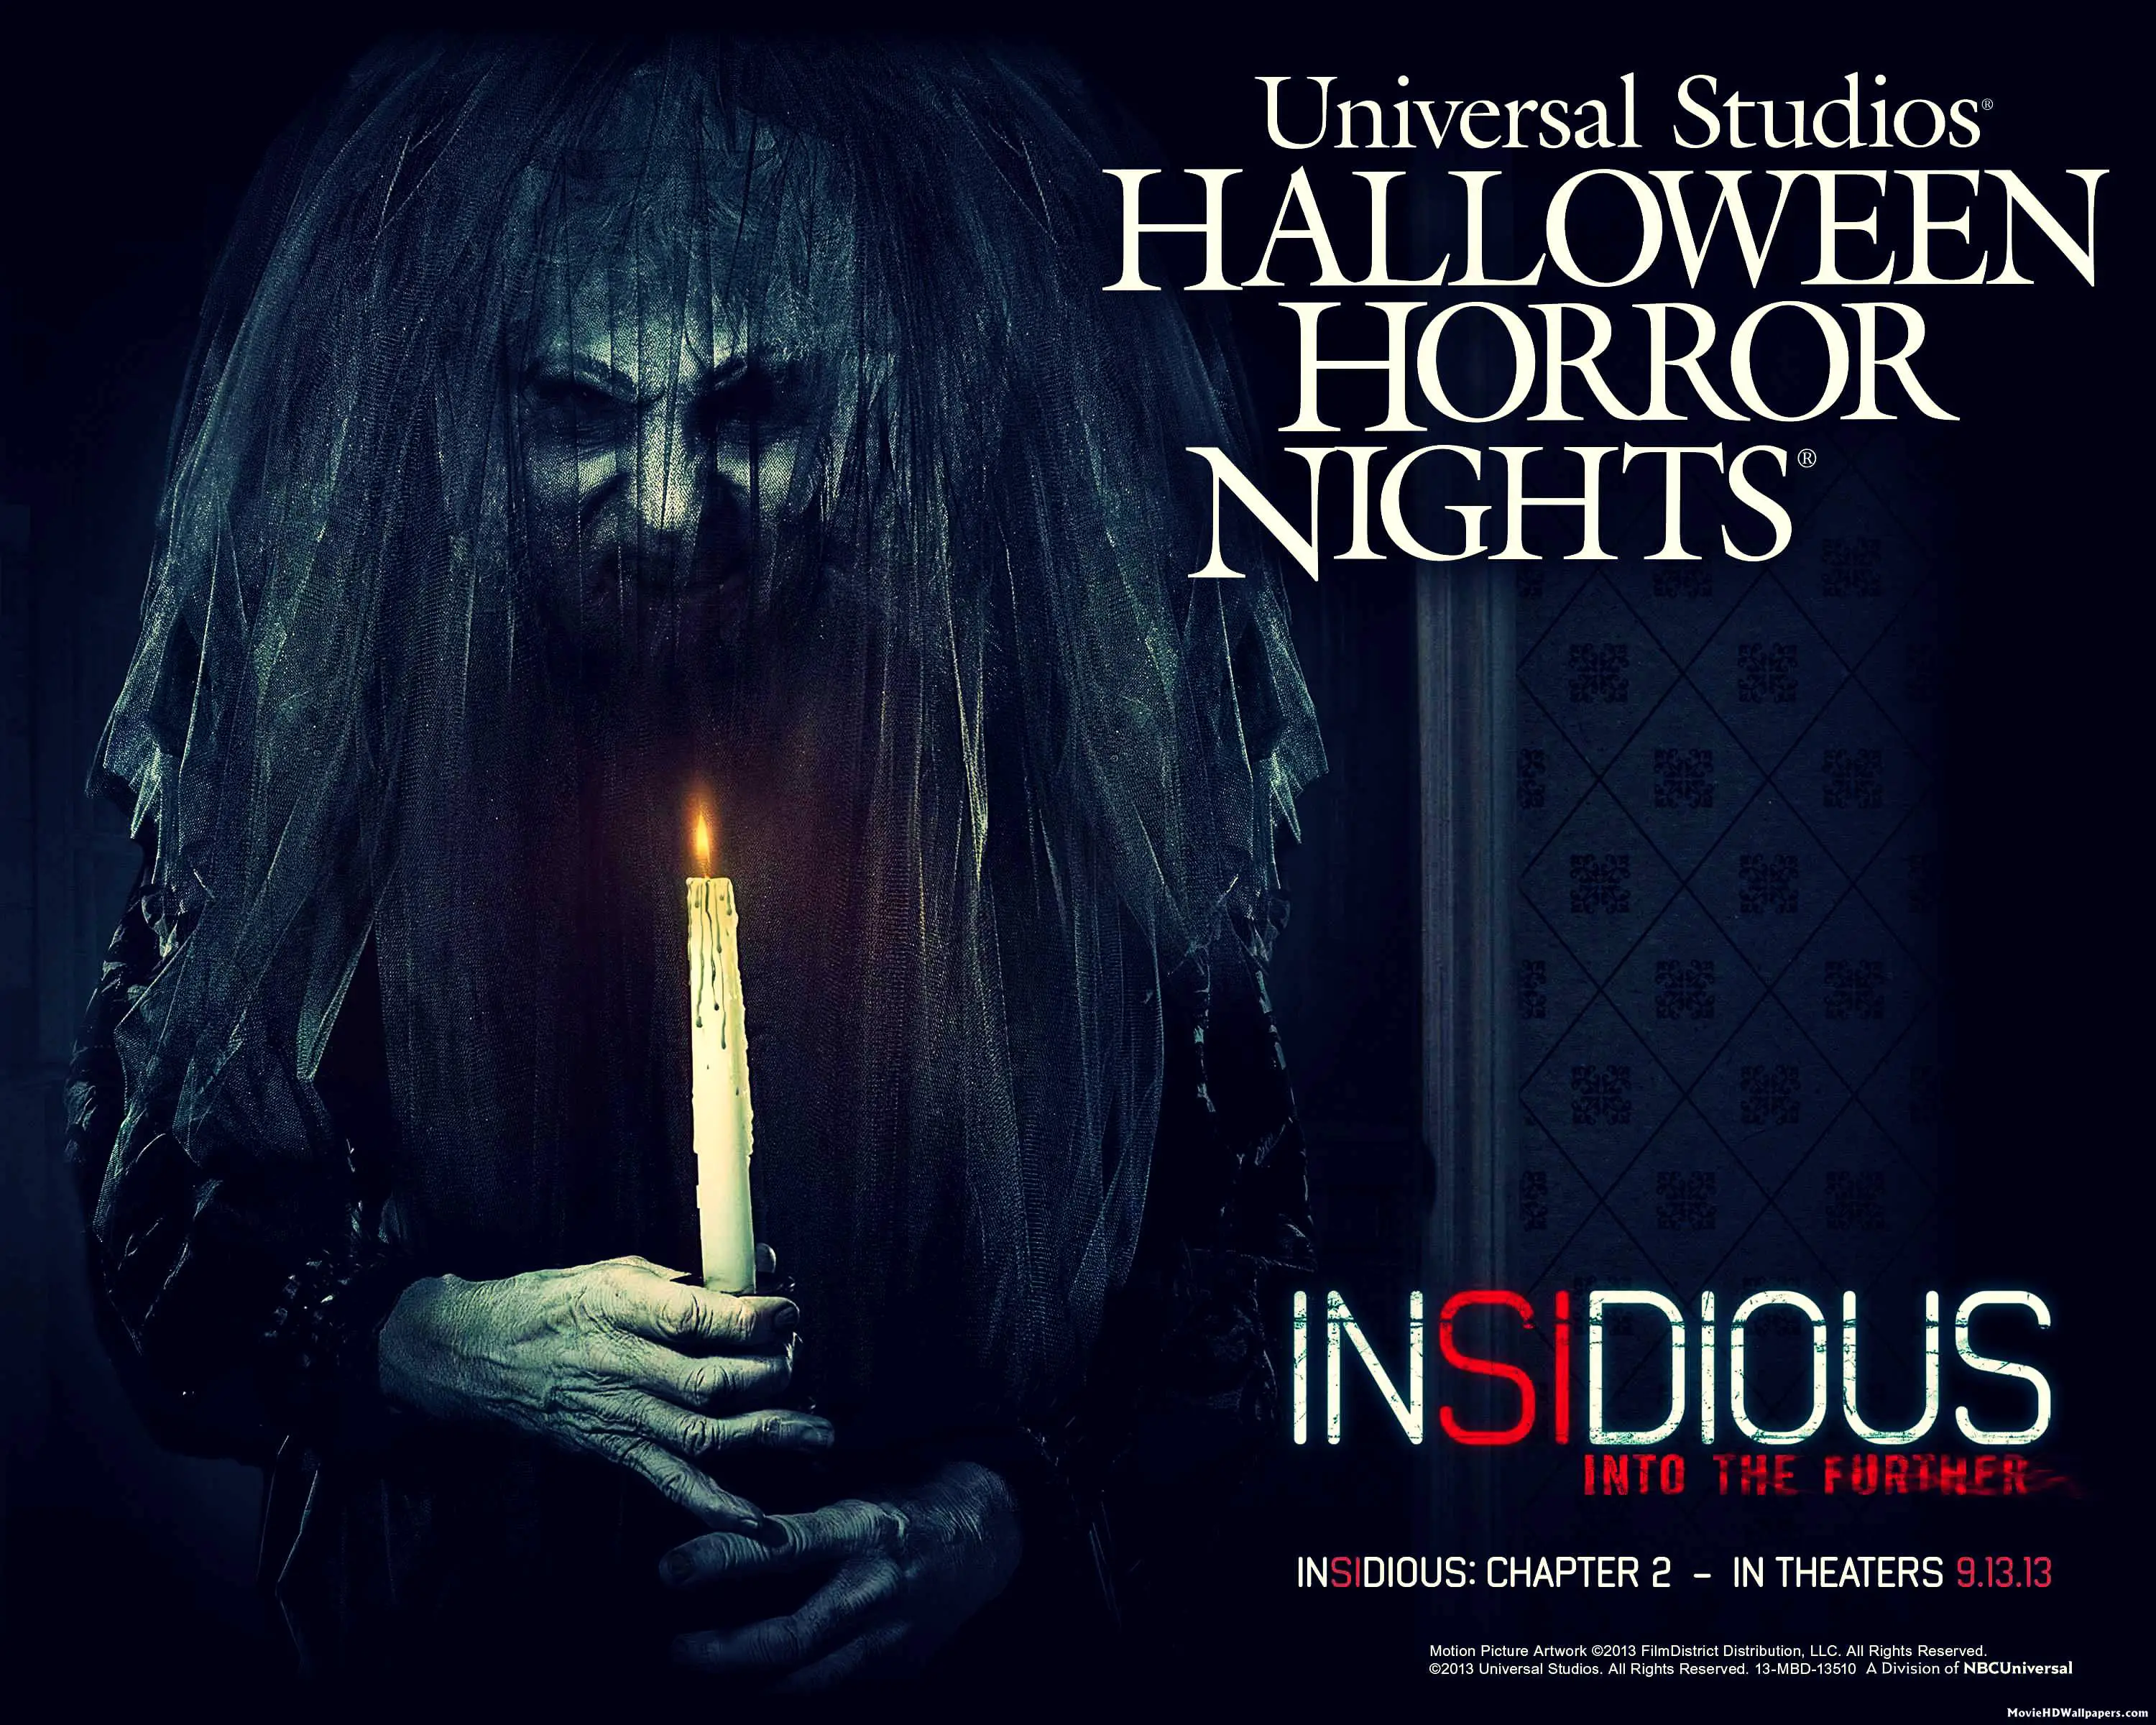 :: DONATING TO CHILDREN WHO LOST THEIR PARENTS TO WAR AND MILITANCY - How To Watch The Insidious Movies In Order